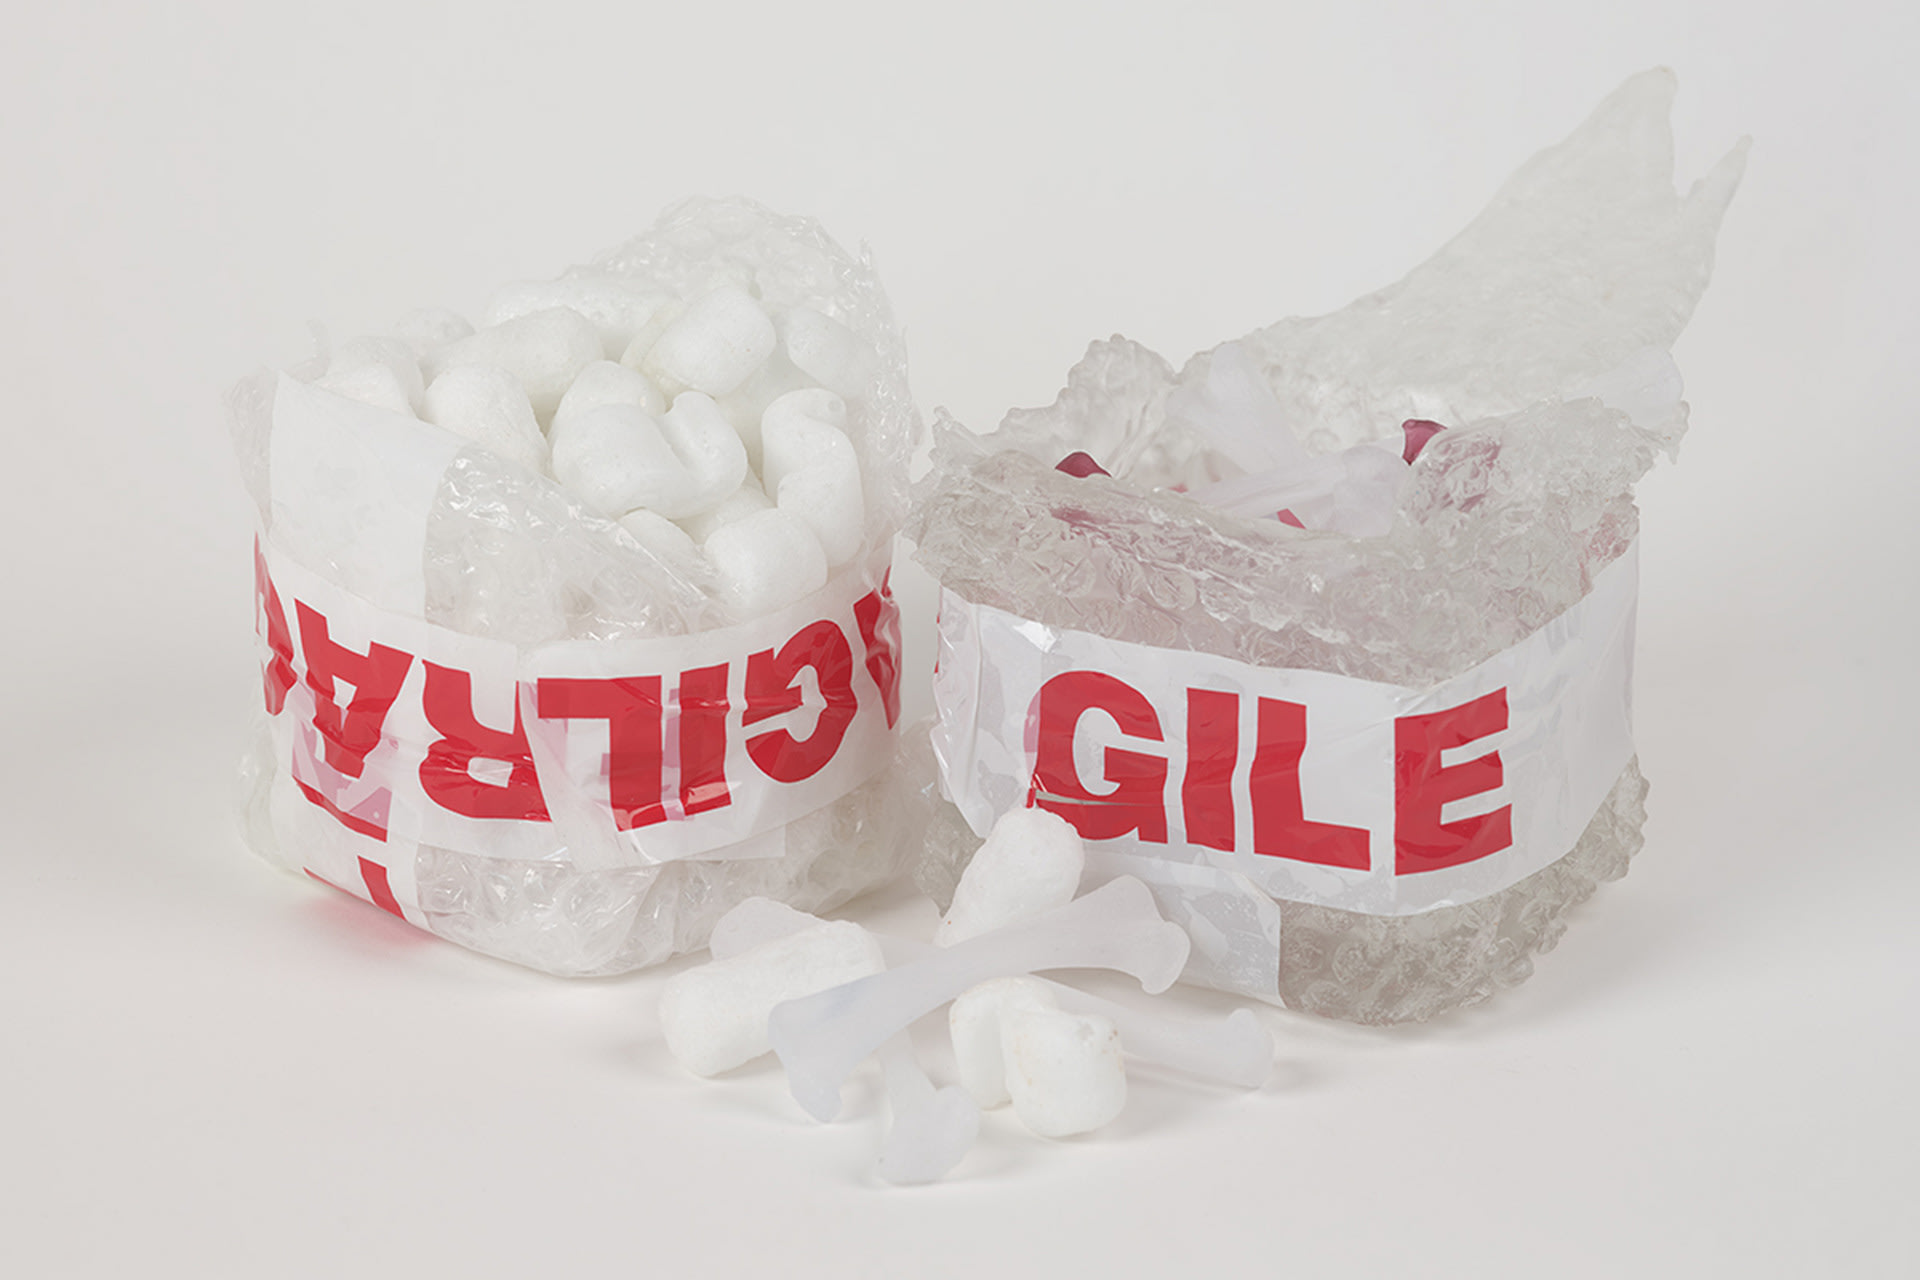 2 clear boxes with red and white fragile tape, 1 box is full of foamed glass packing peanuts, the other clear glass bones